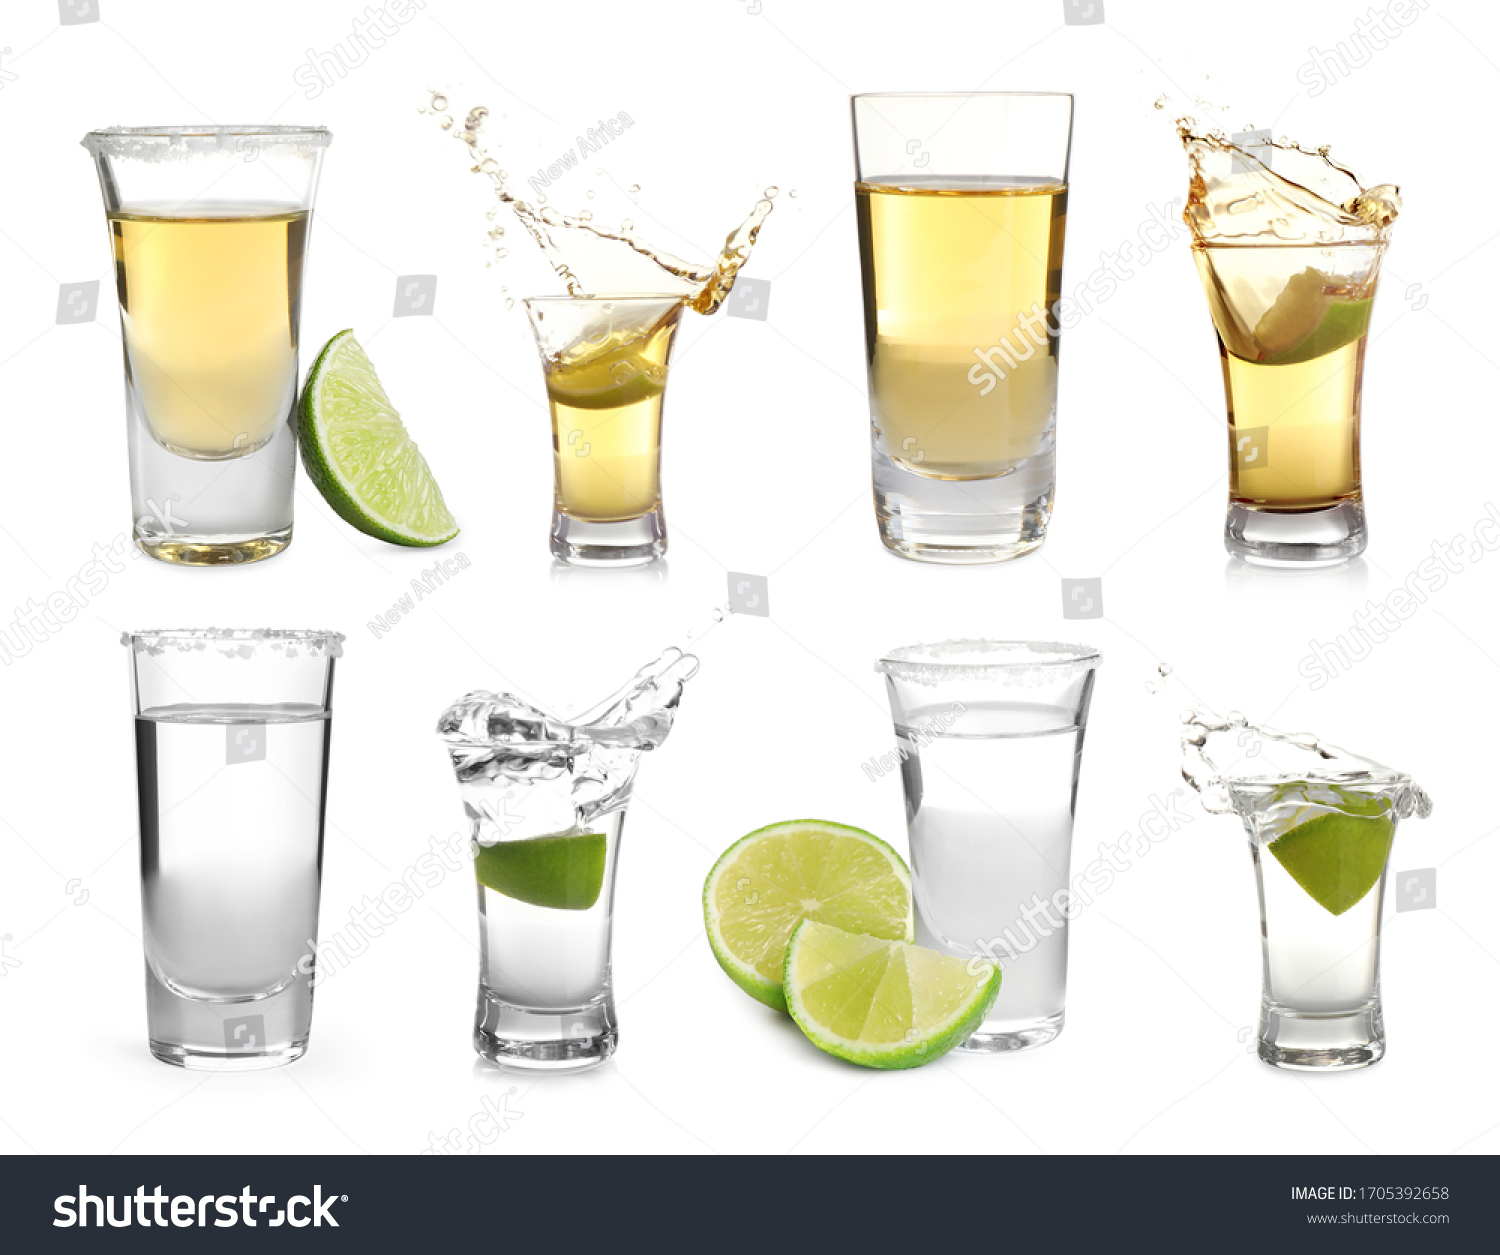 Set of different Mexican Tequila shots on white background #1705392658